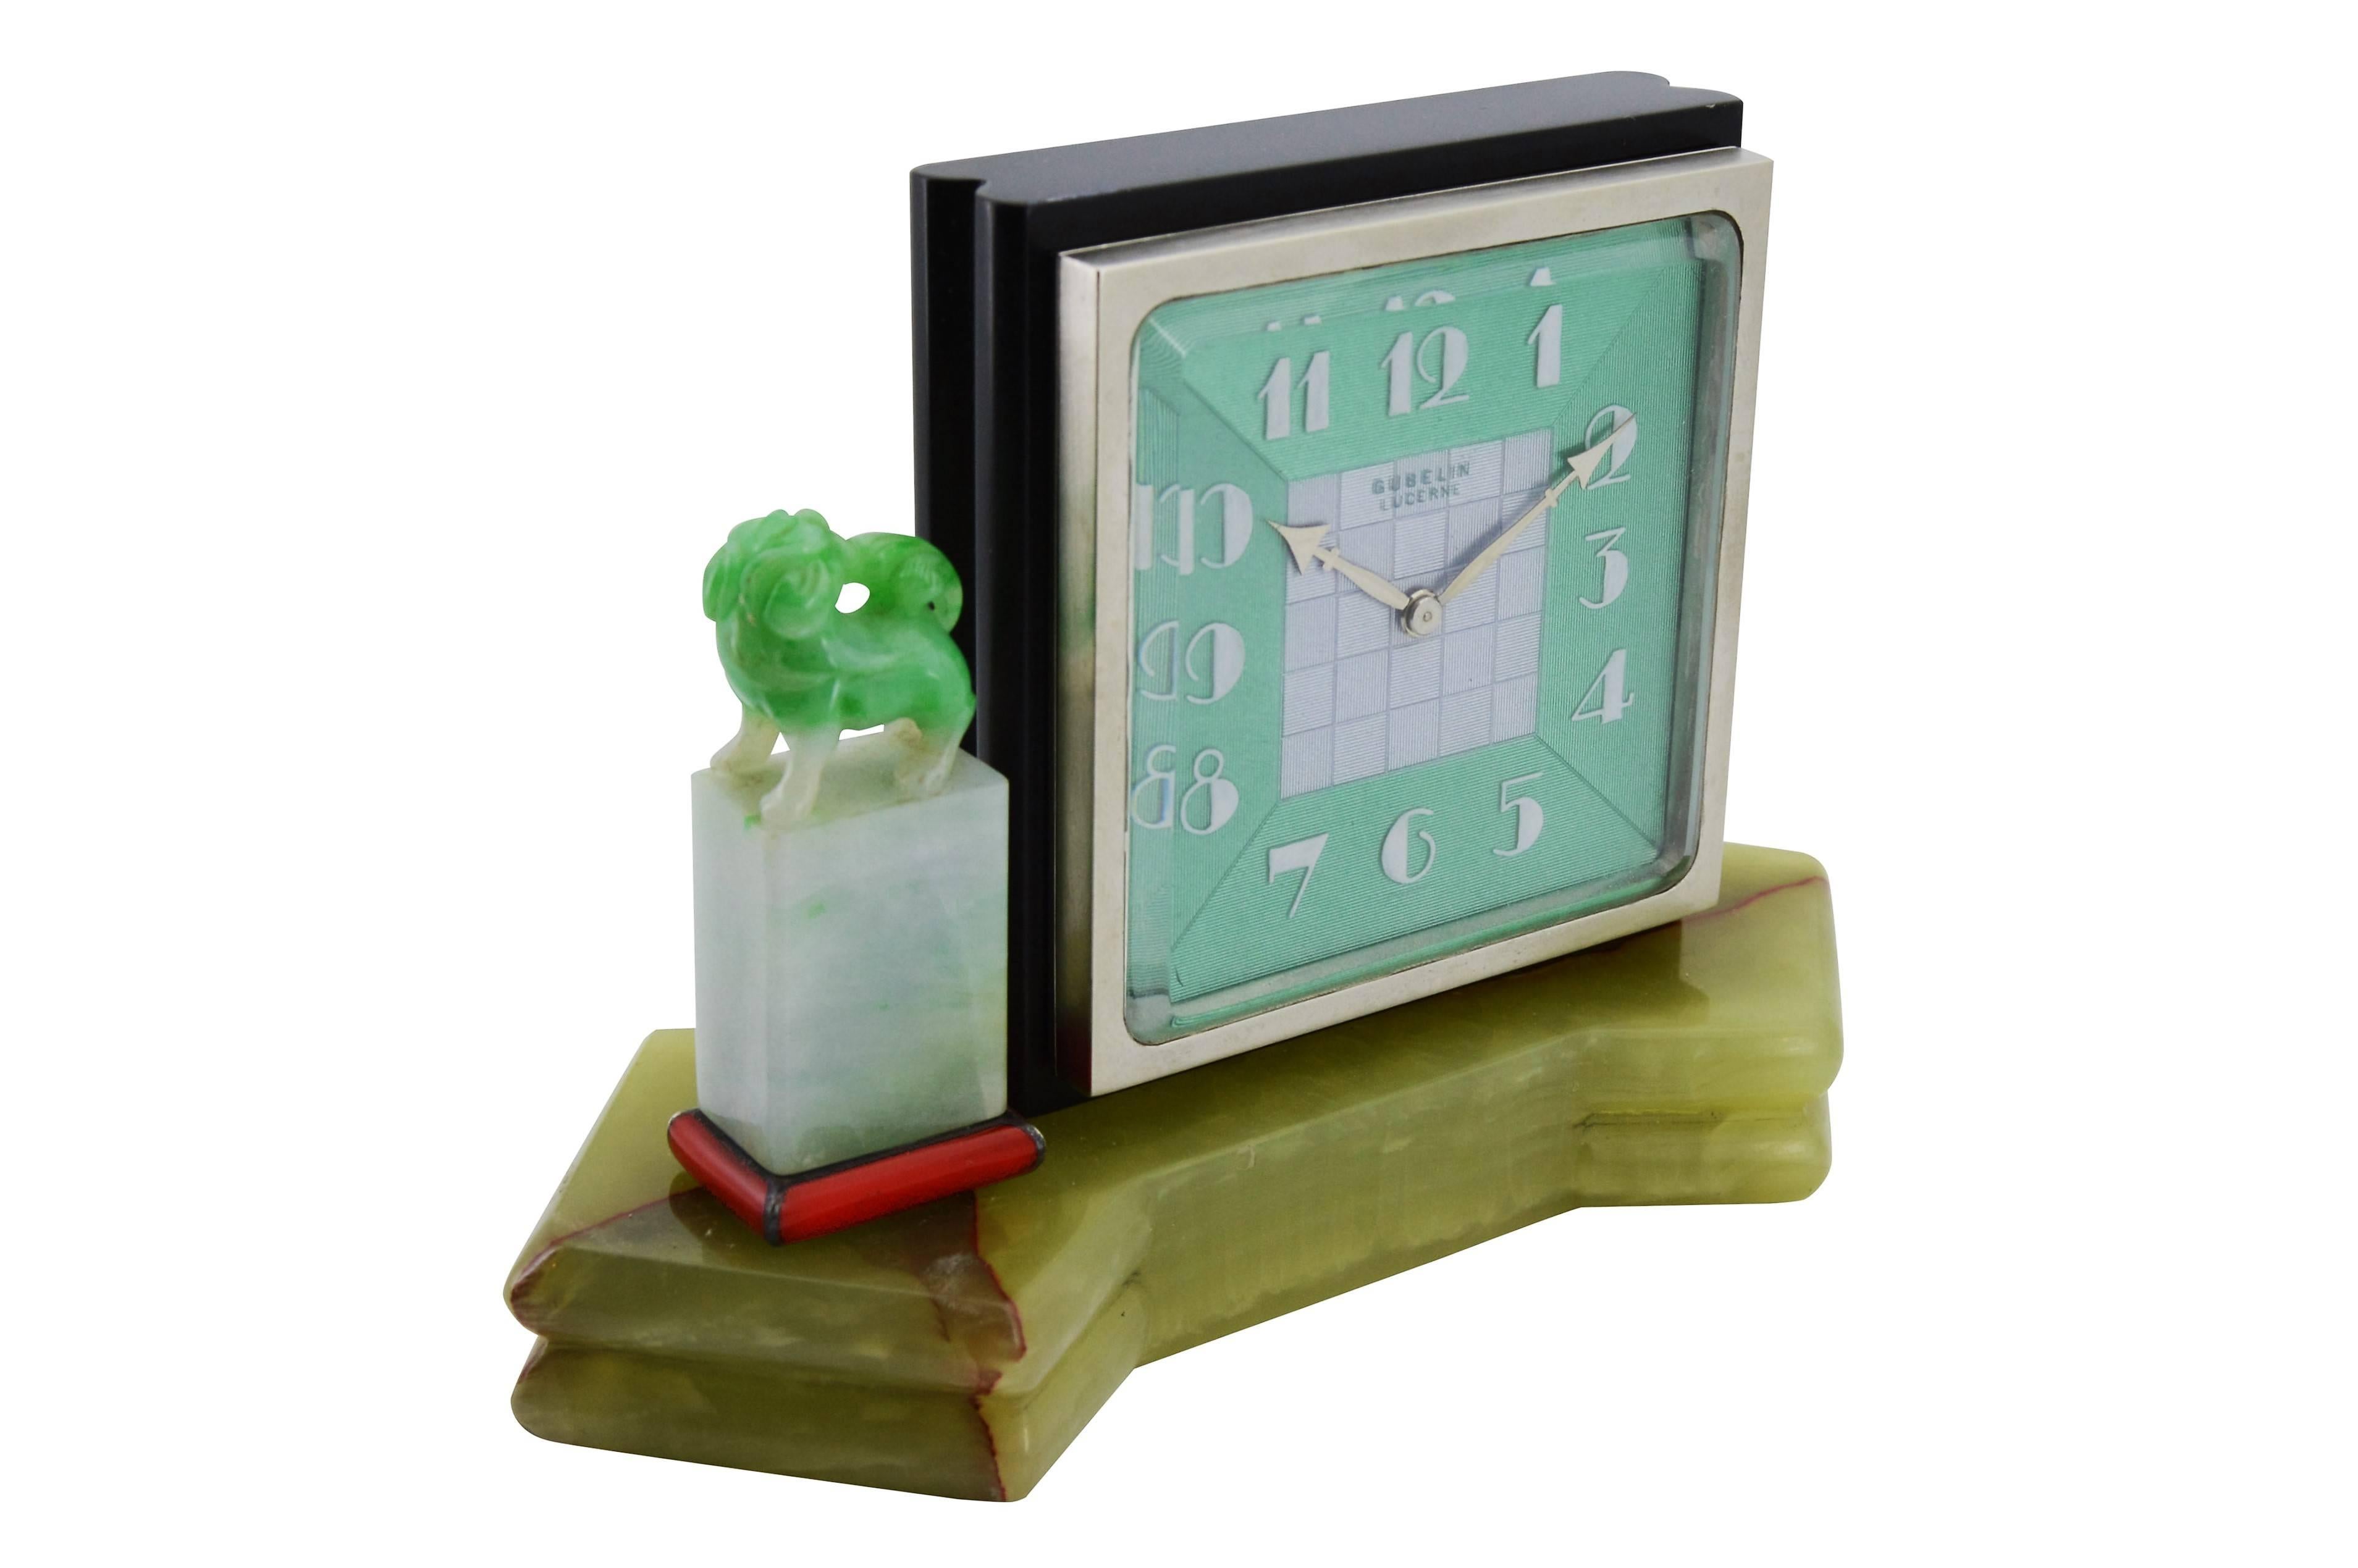 FACTORY / HOUSE: E. Gubelin, Lucerne Switzerland
STYLE / REFERENCE: Art Deco, Desk Clock
METAL / MATERIAL:
CIRCA / YEAR:
DIMENSIONS: Length 5.75 Inches (14cm) long x Diameter 4 inches (10cm) Tall x 2.25 Inches (6cm) Deep
MOVEMENT / CALIBER: 8 Day,